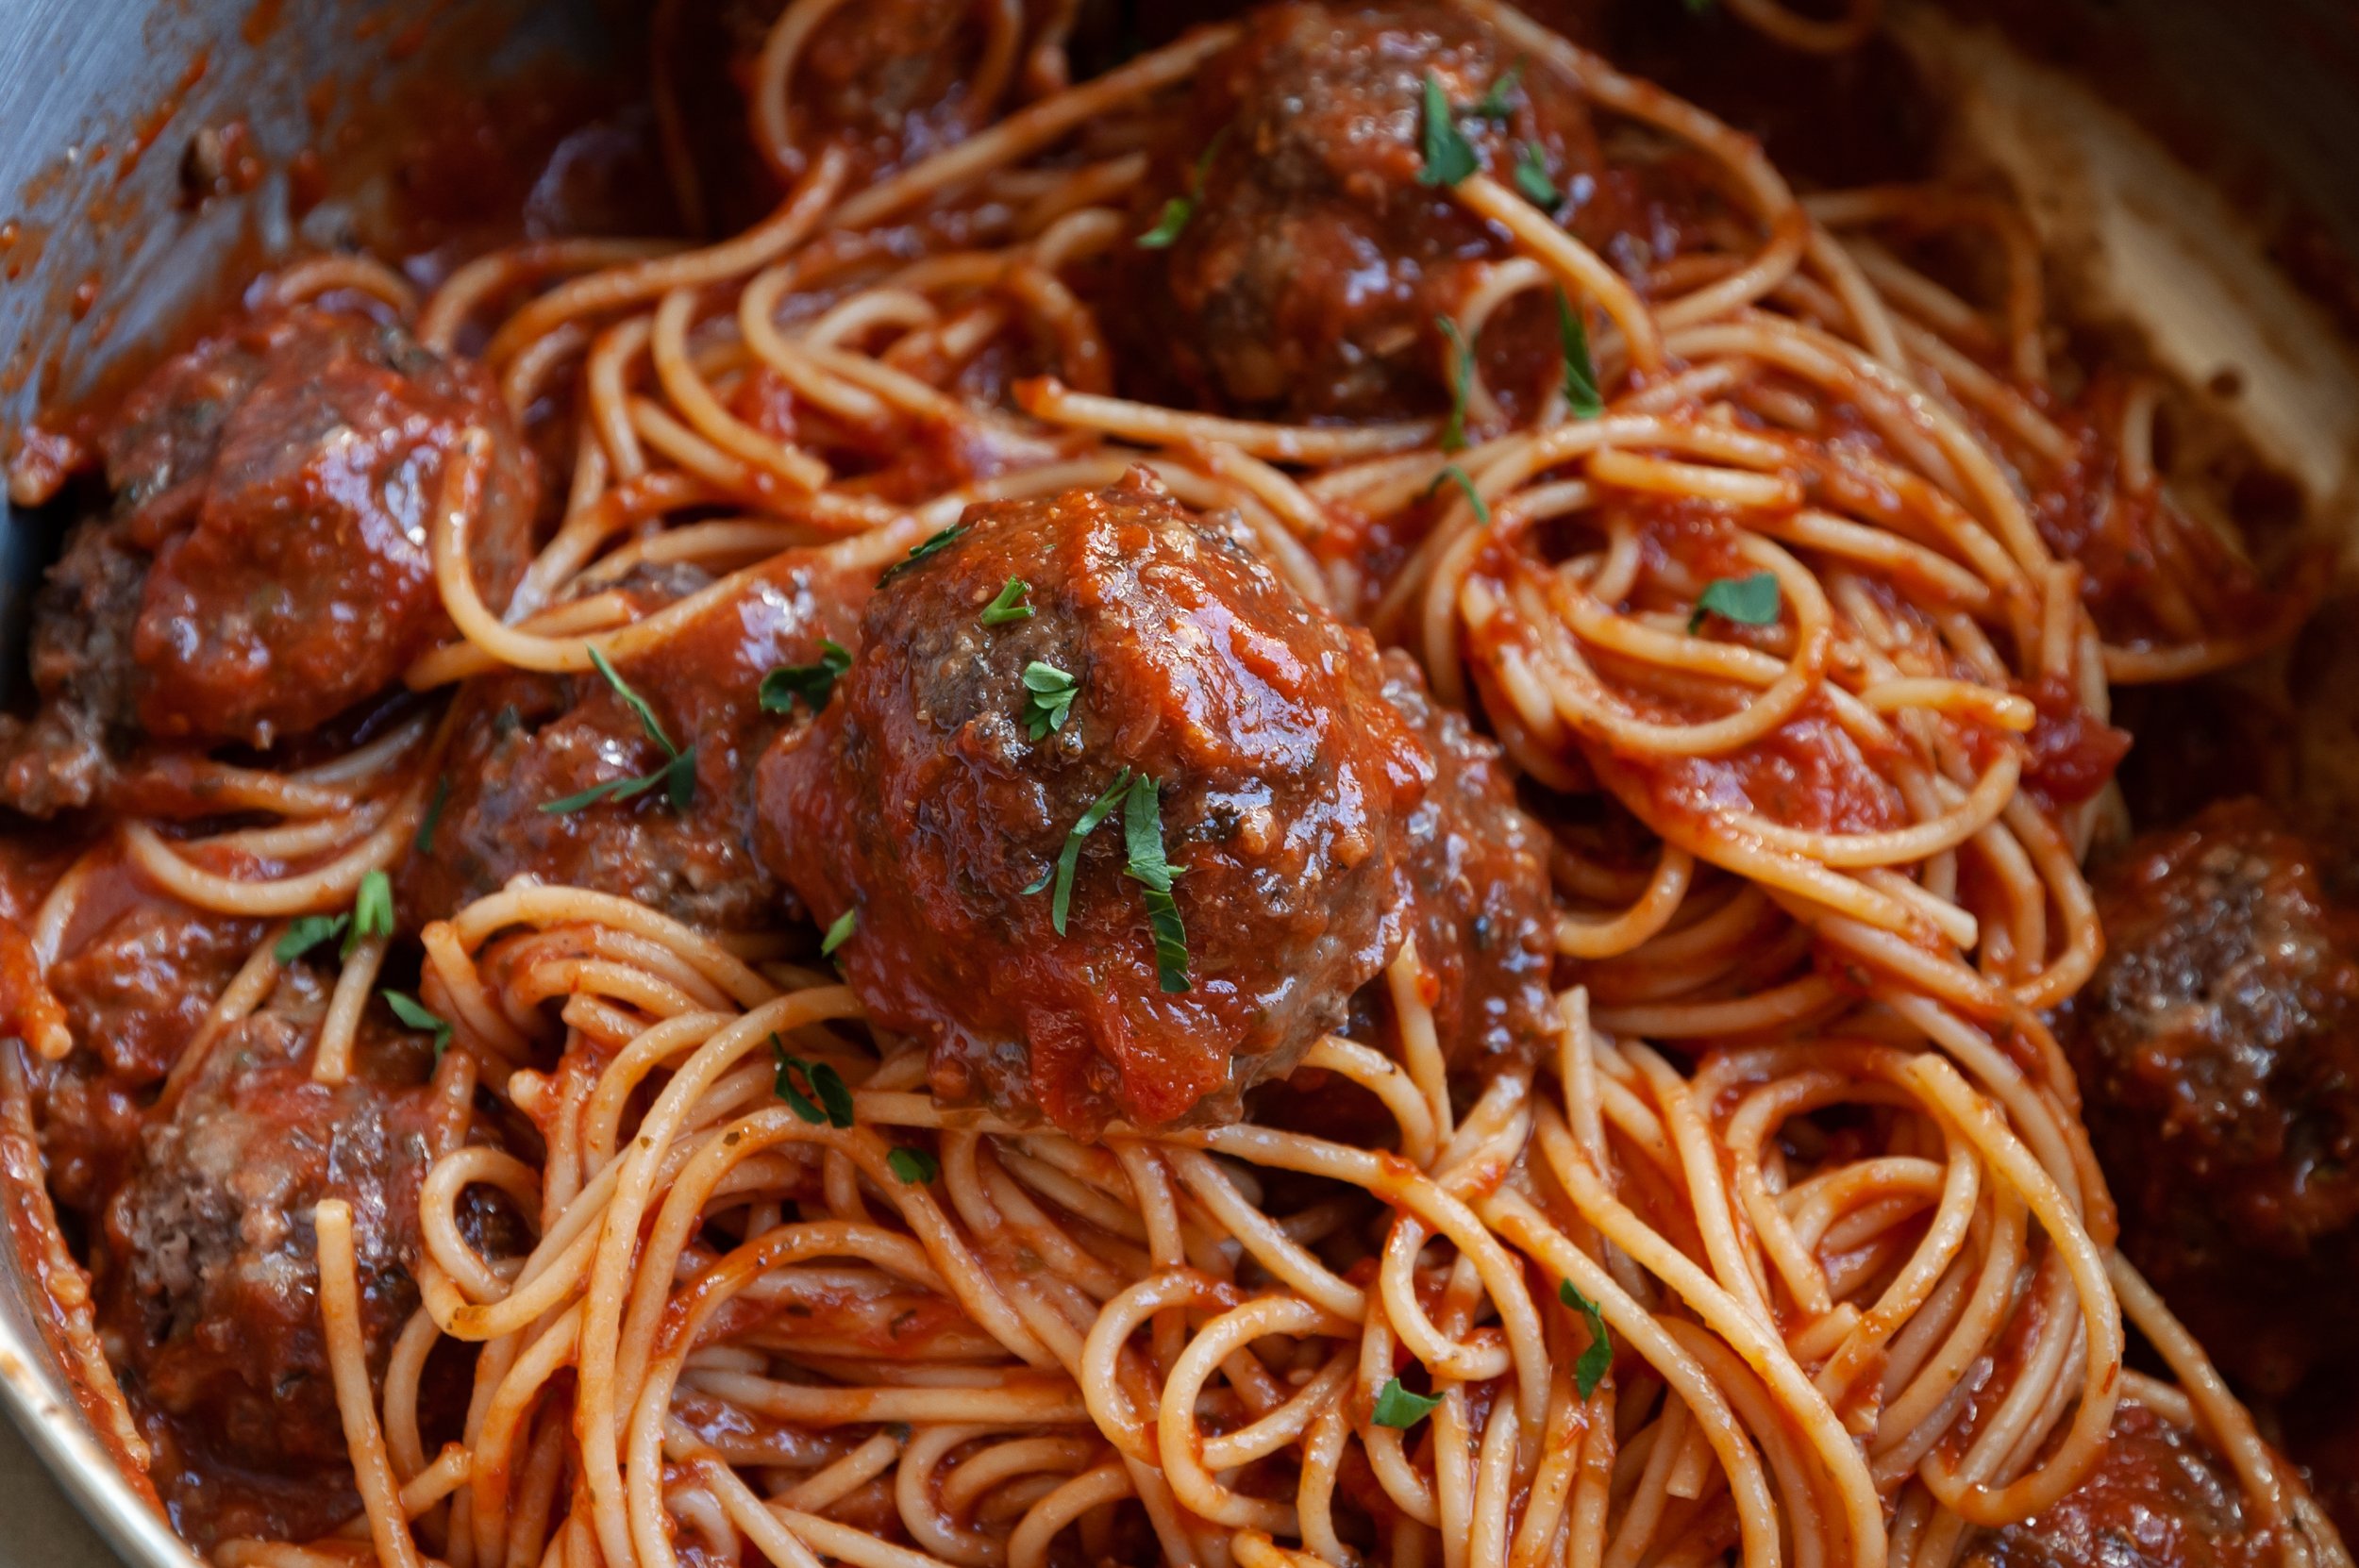 How to Make Gluten-Free Spaghetti and Meatballs